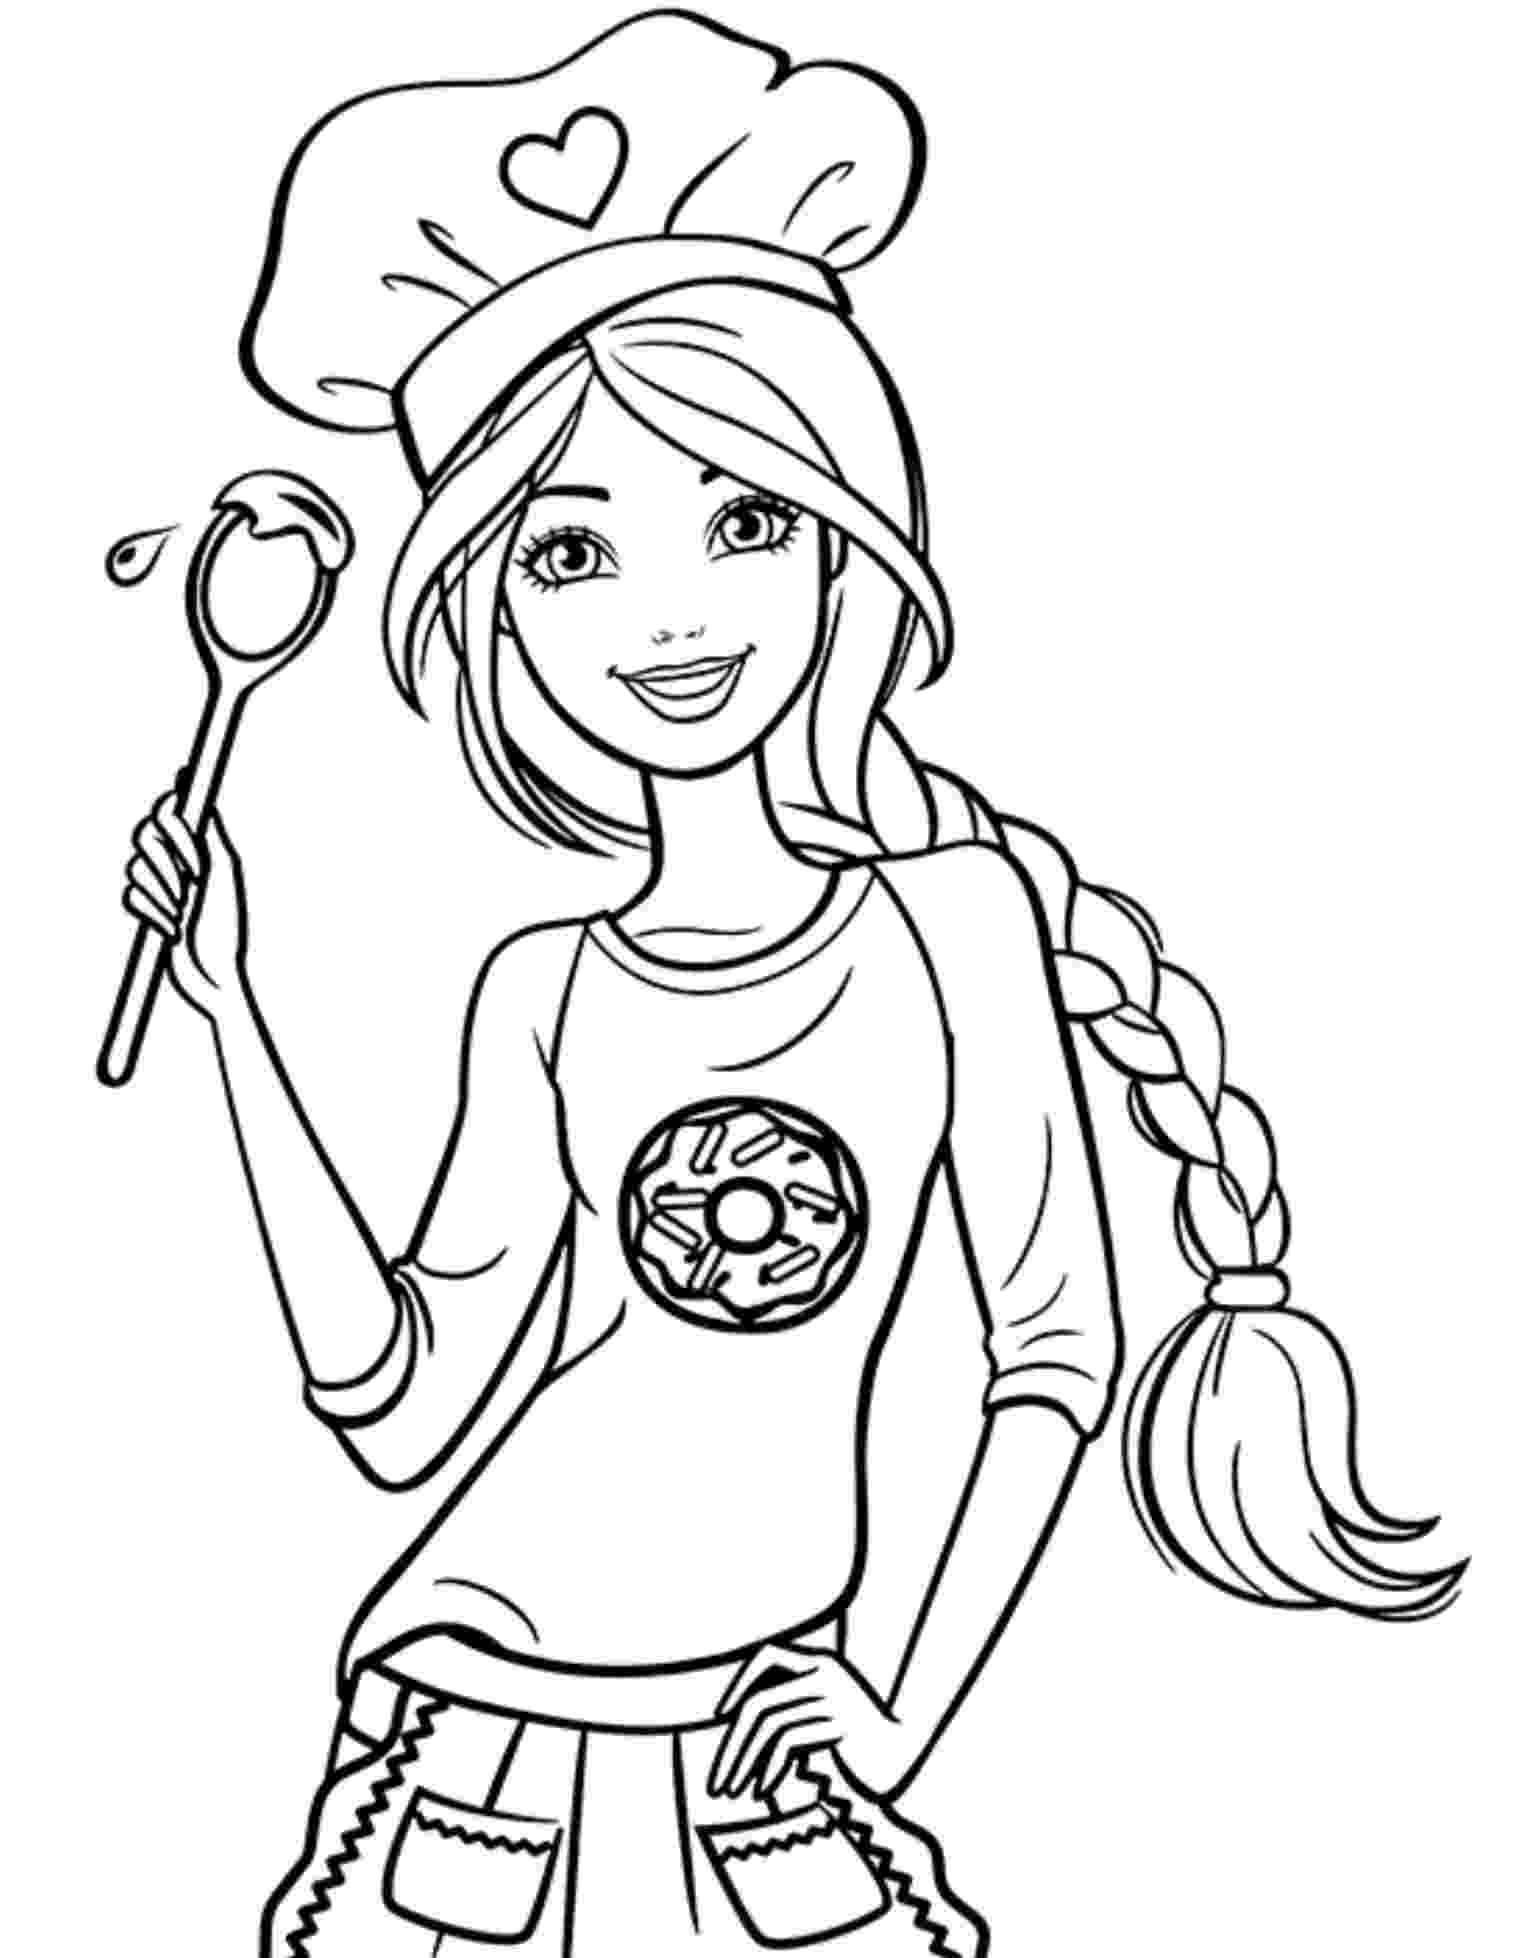 barbie coloring pages for kids chef barbie coloring page barbie drawing barbie coloring for pages kids barbie 